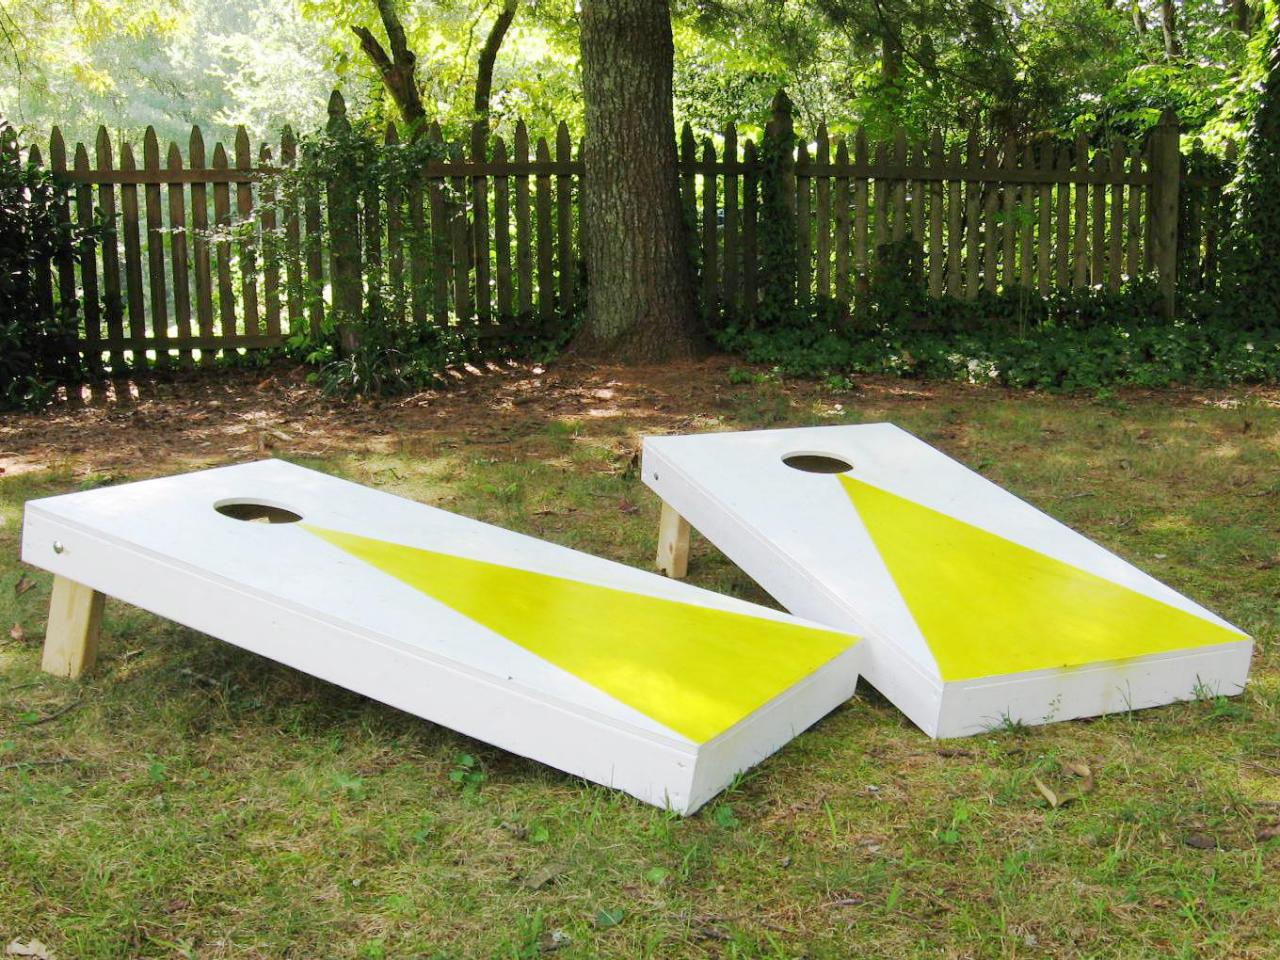 Now in this article we have provided proper guidelines for cornhole board p...